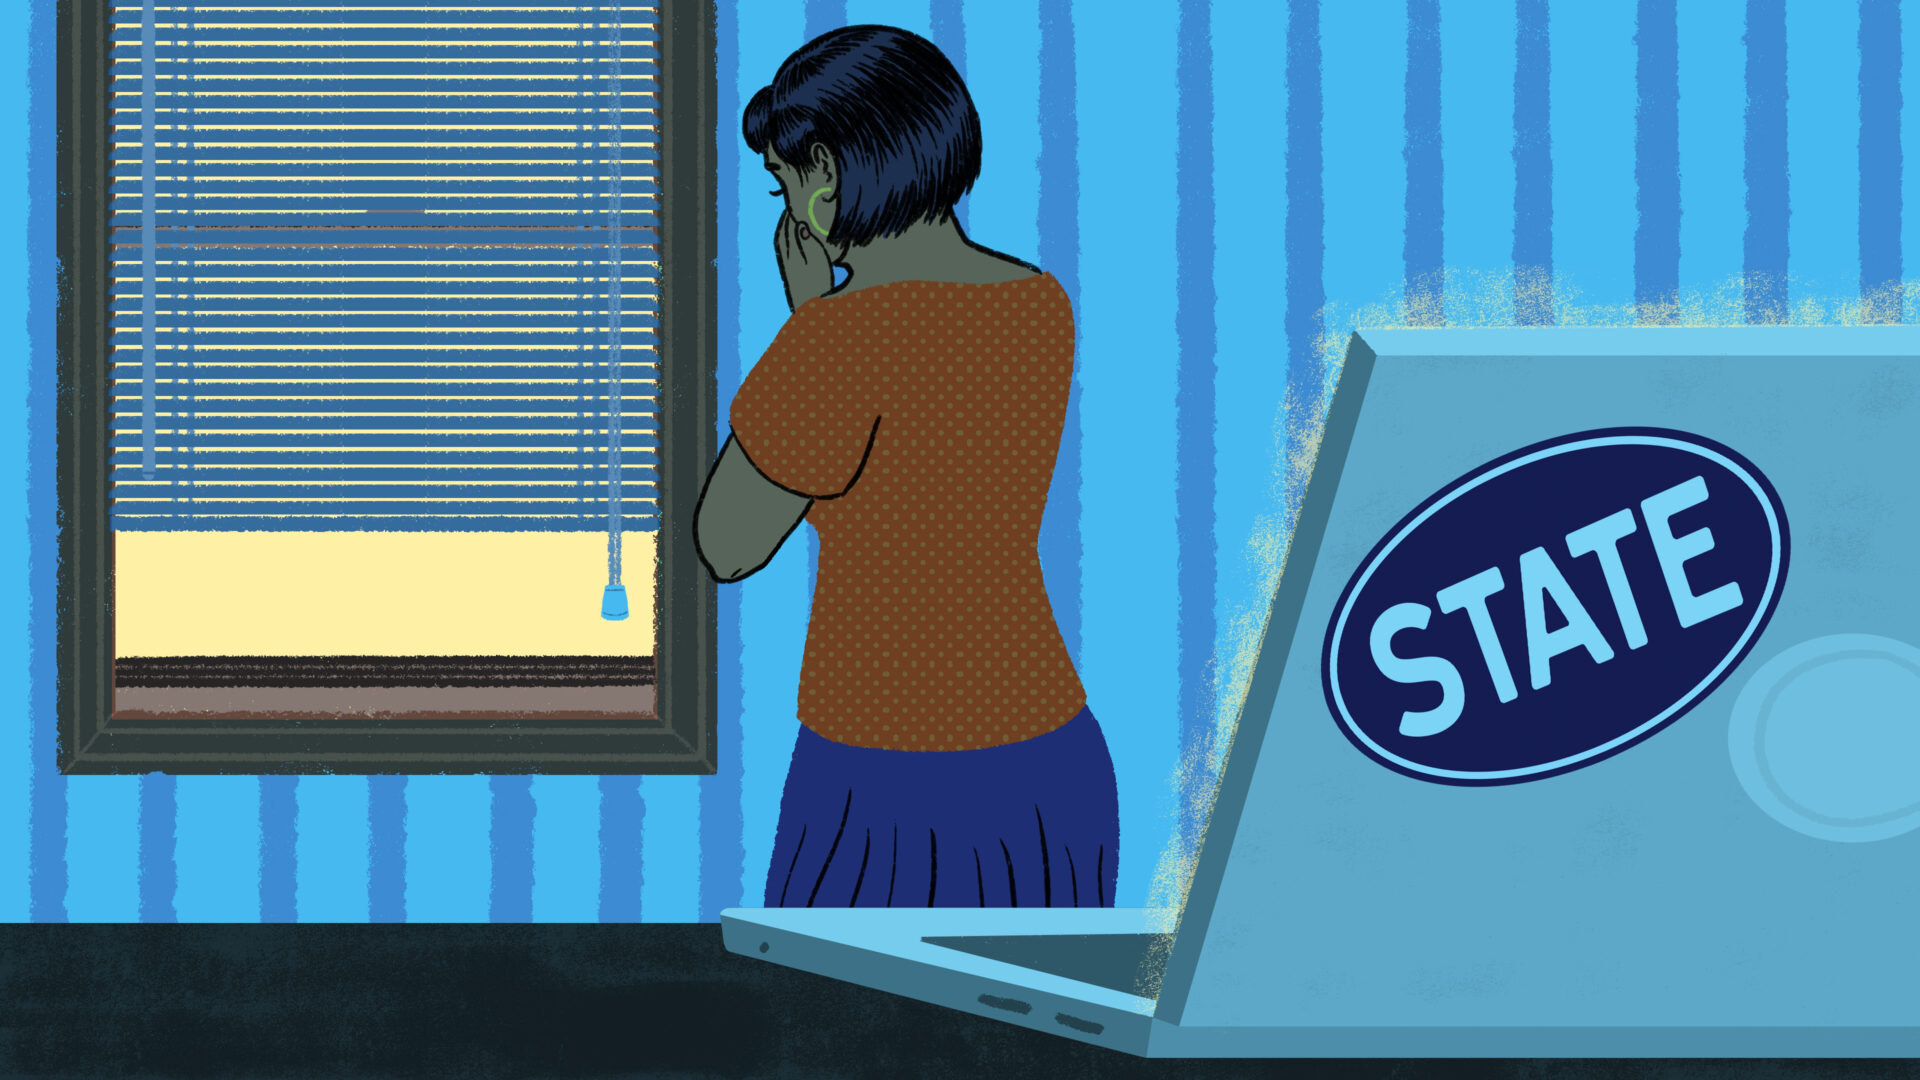 A woman is turned toward a window crying next to a laptop with a “State” sticker.